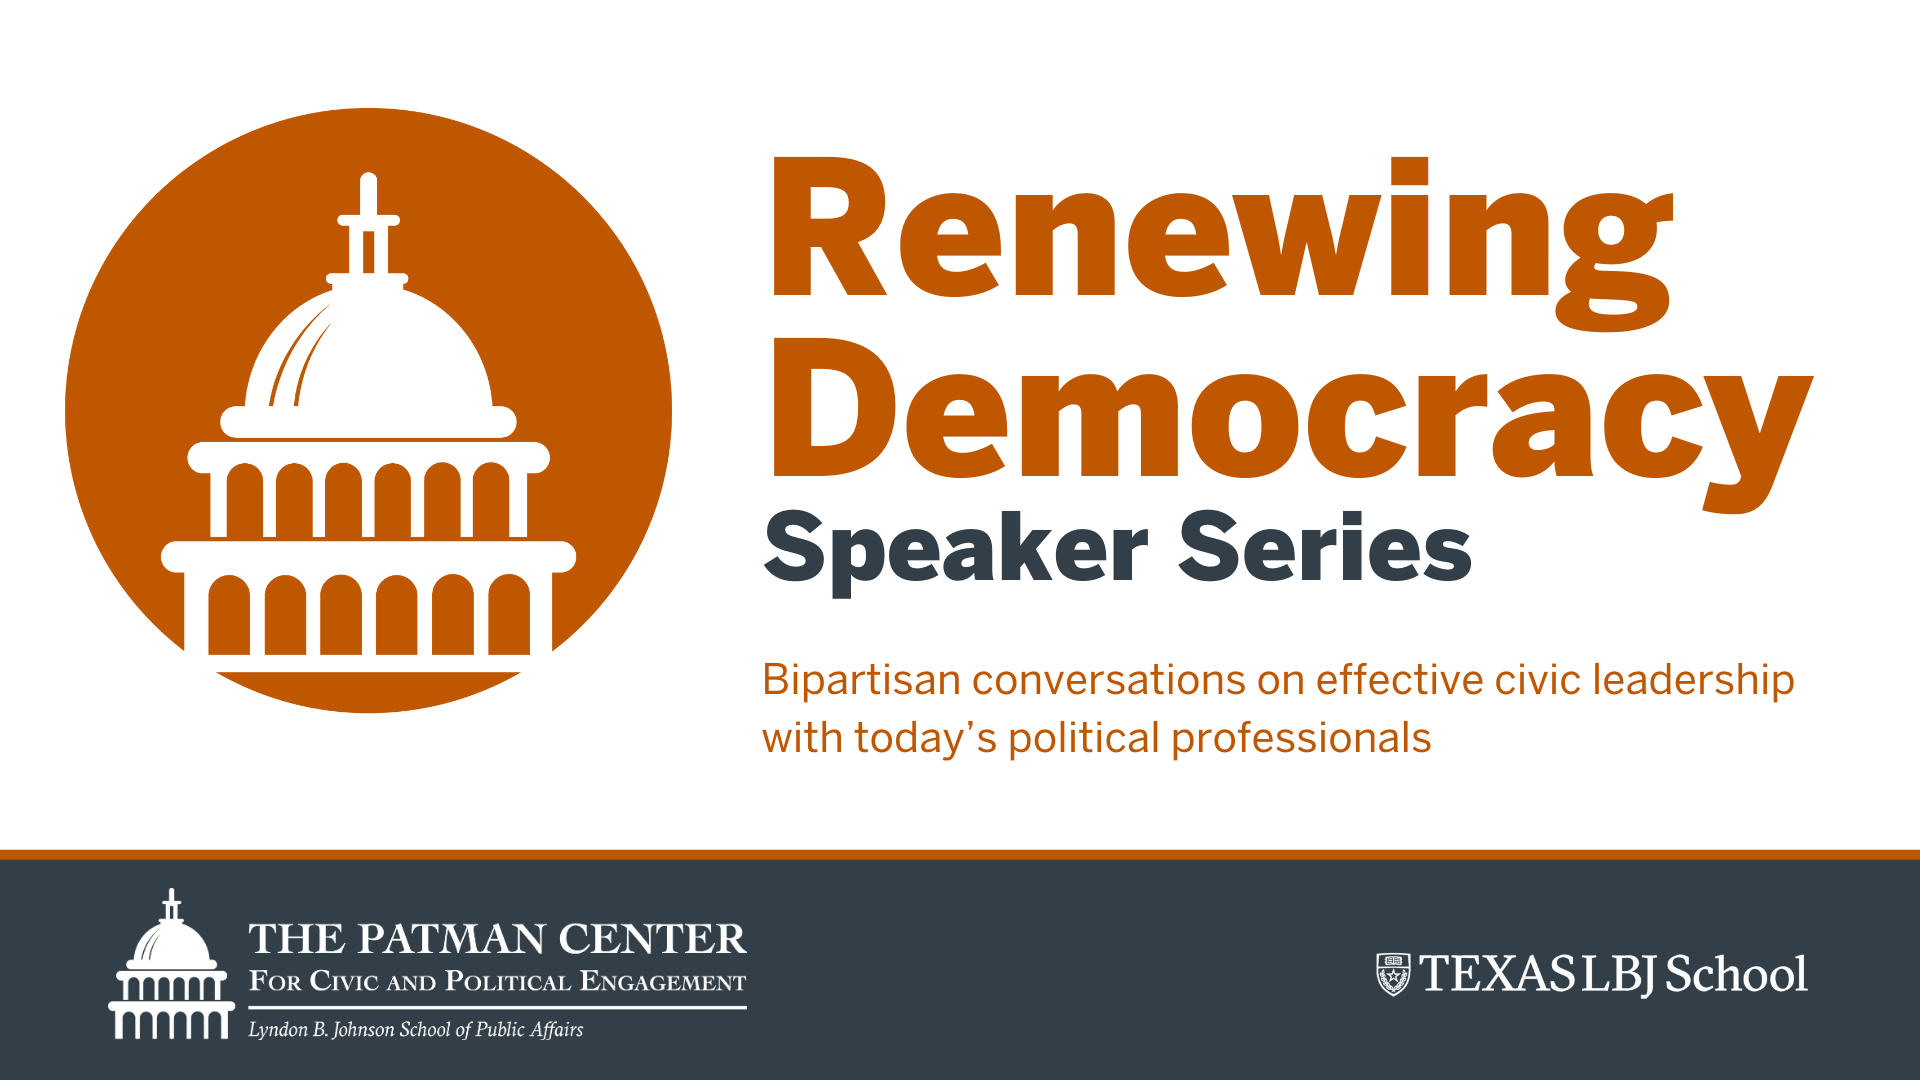 A graphic containing the Renewing Democracy logo and speak series alongside wordmarks for both The Patman Center and LBJ School